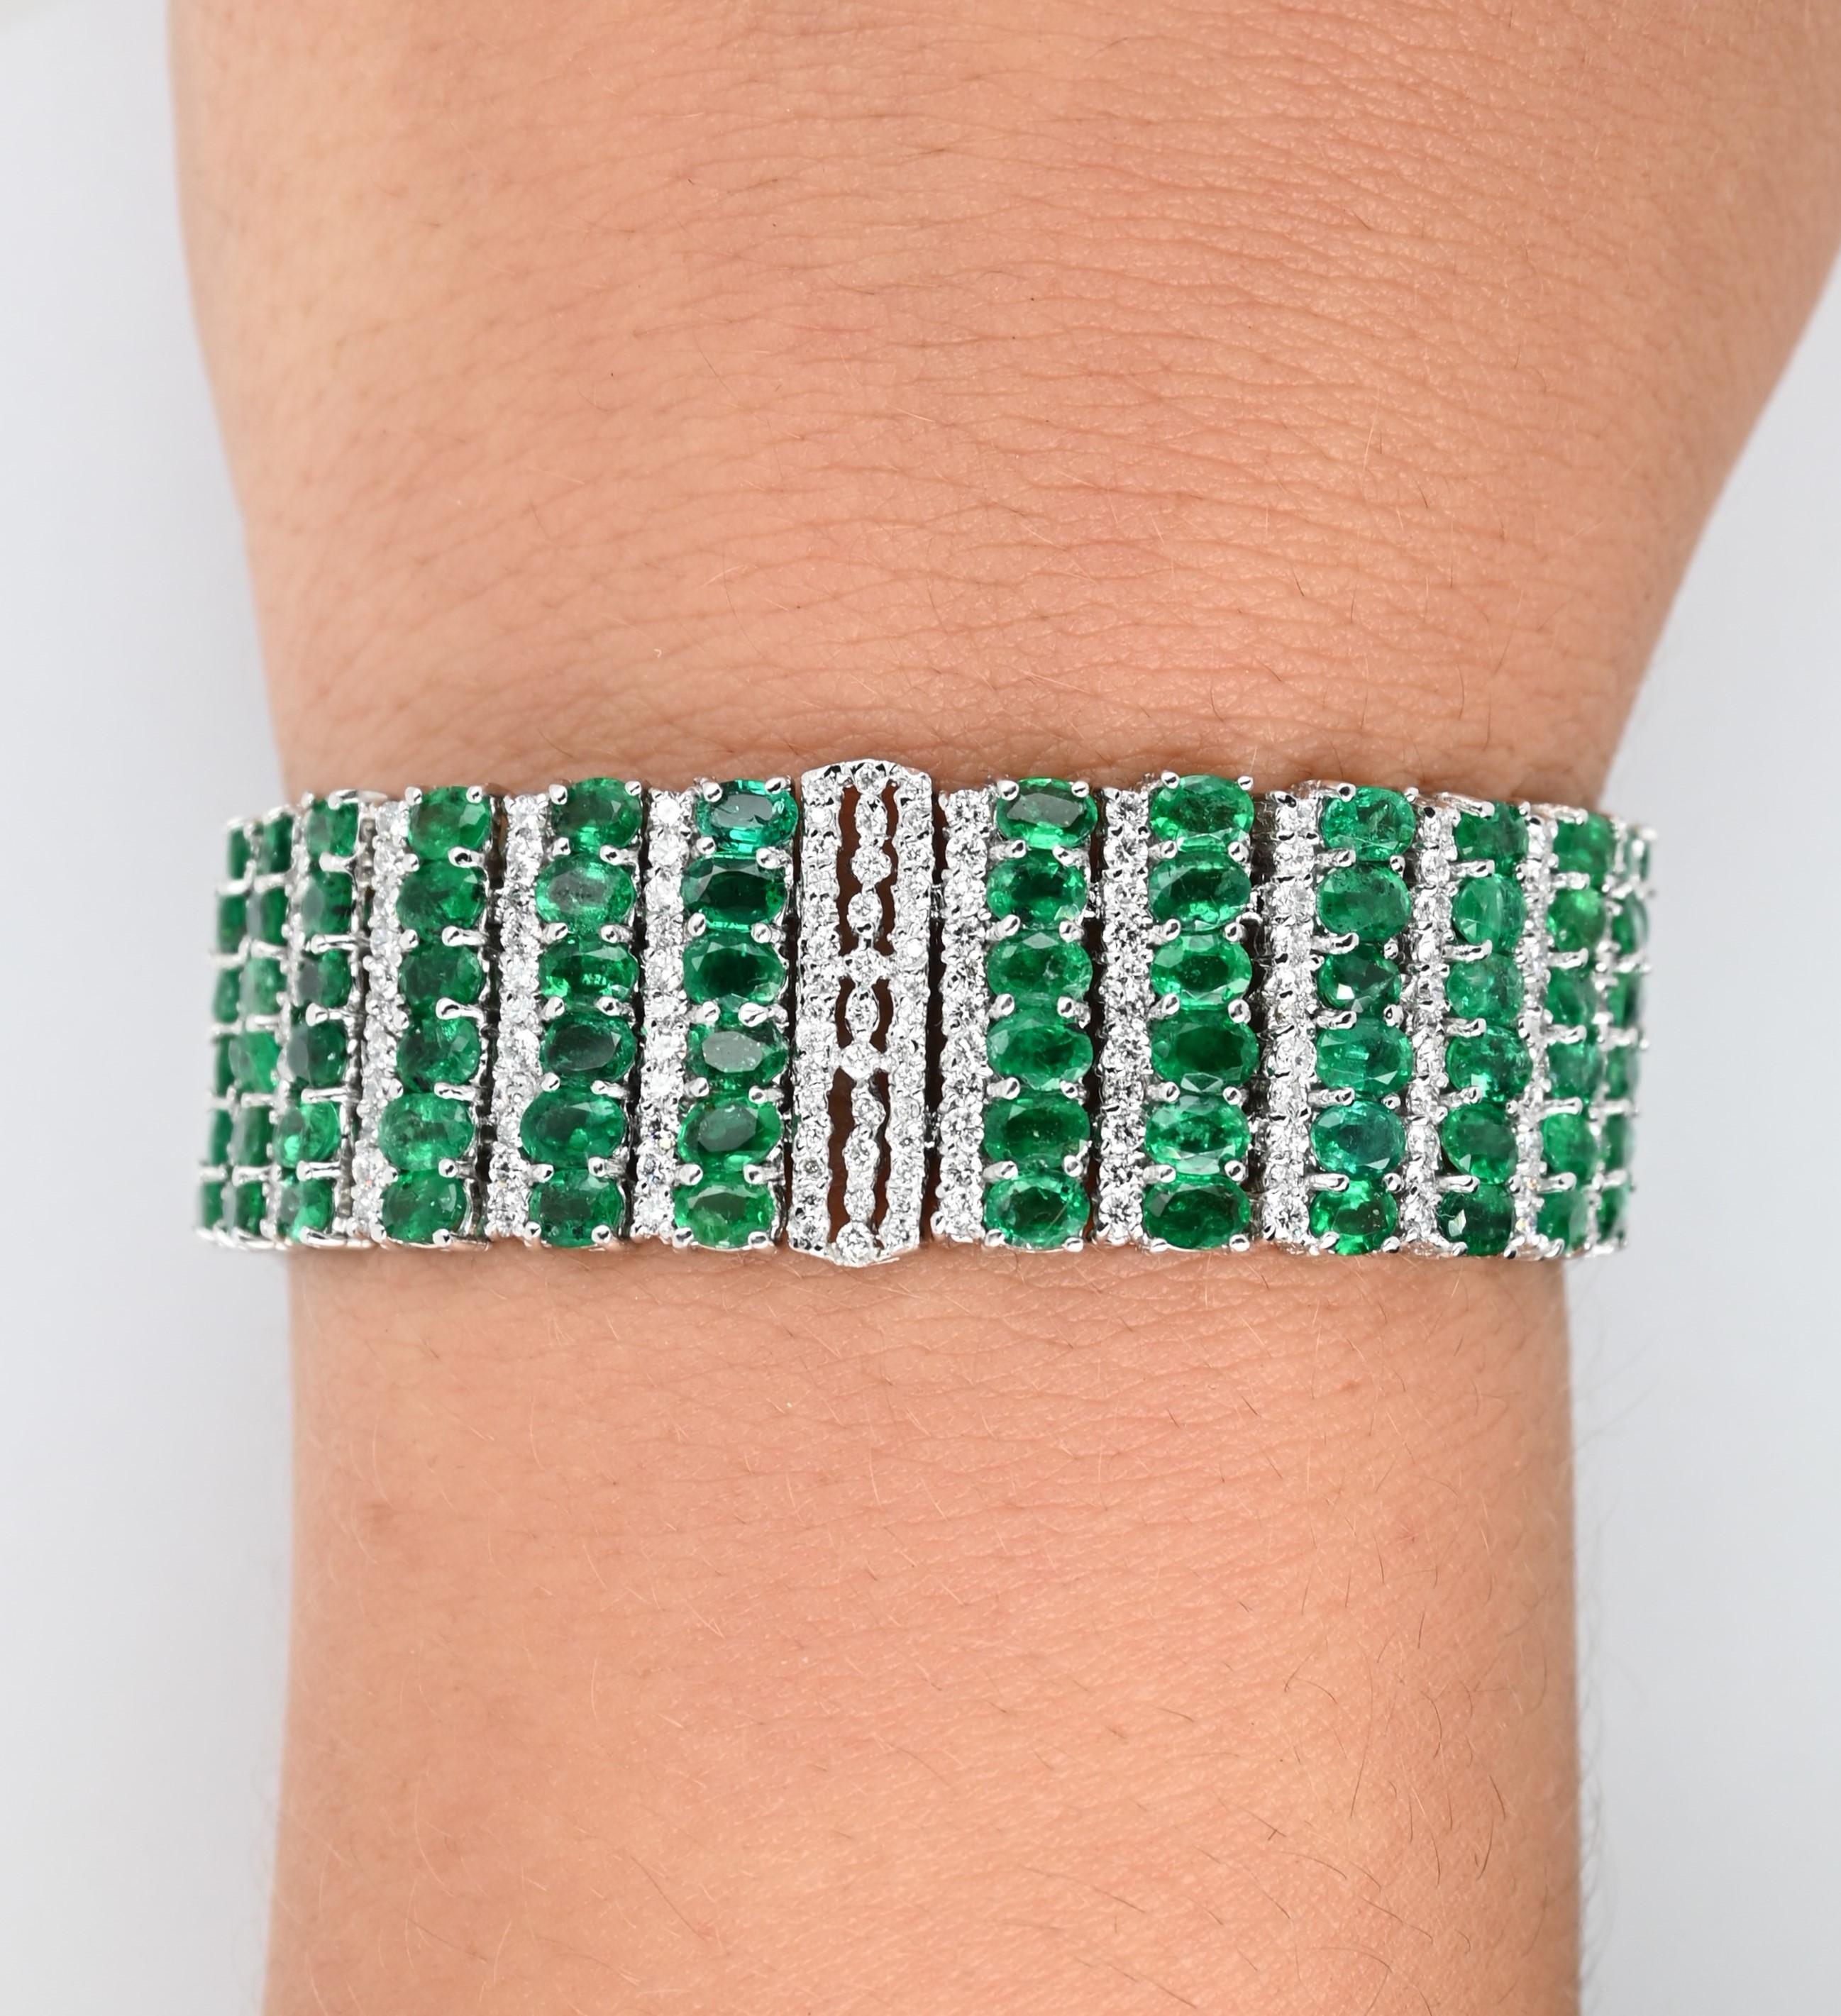 Magnum Creations original design, features 5.86 carats of white diamonds and 25.15 carats of emeralds, mounted on a 14 karats white gold casting.

This bracelet is impressive and elegant, the green of the emeralds resembles nature and